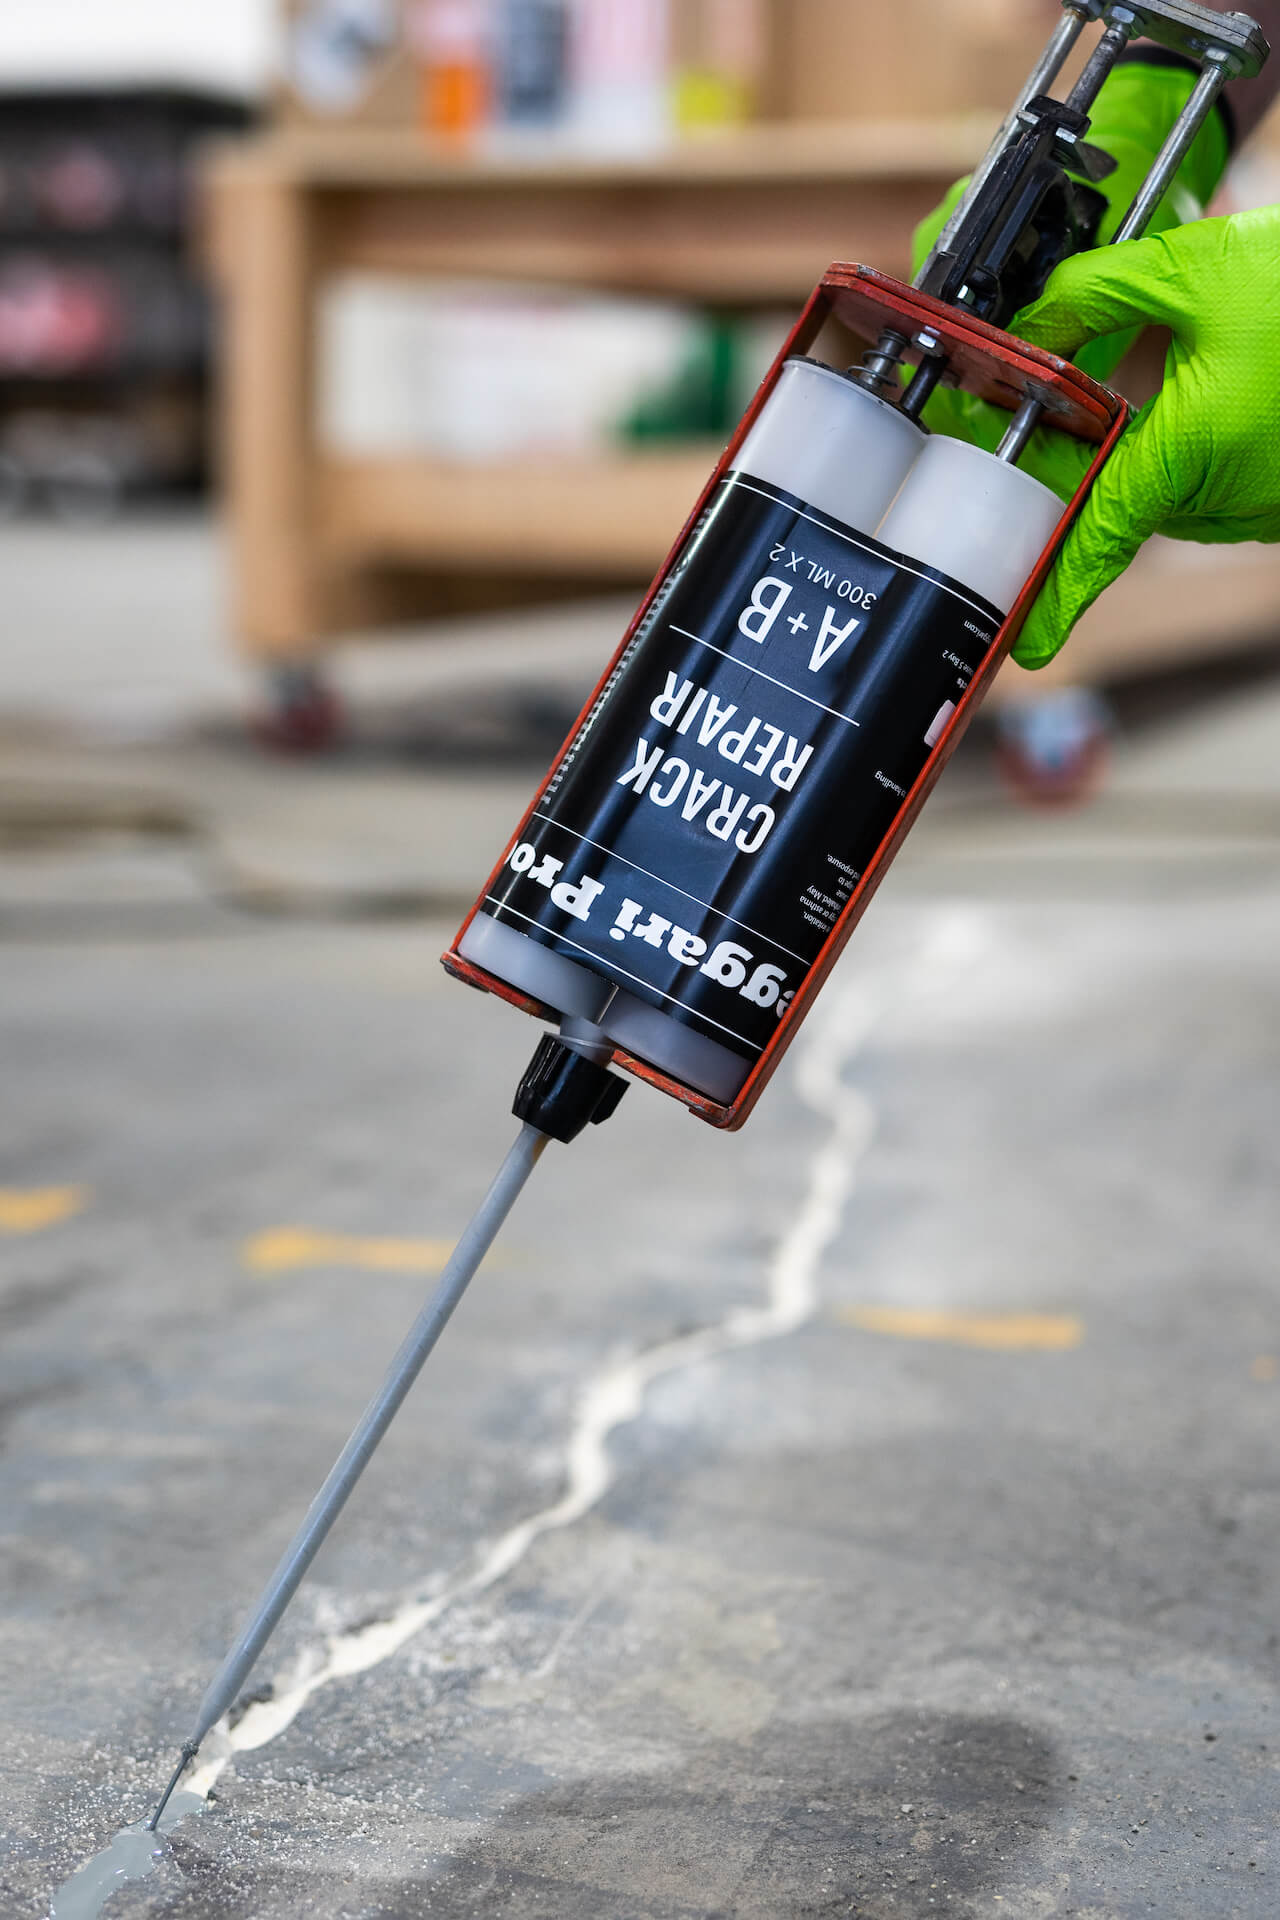 Applying Leggari's two-part crack repair product to a badly cracked concrete floor.